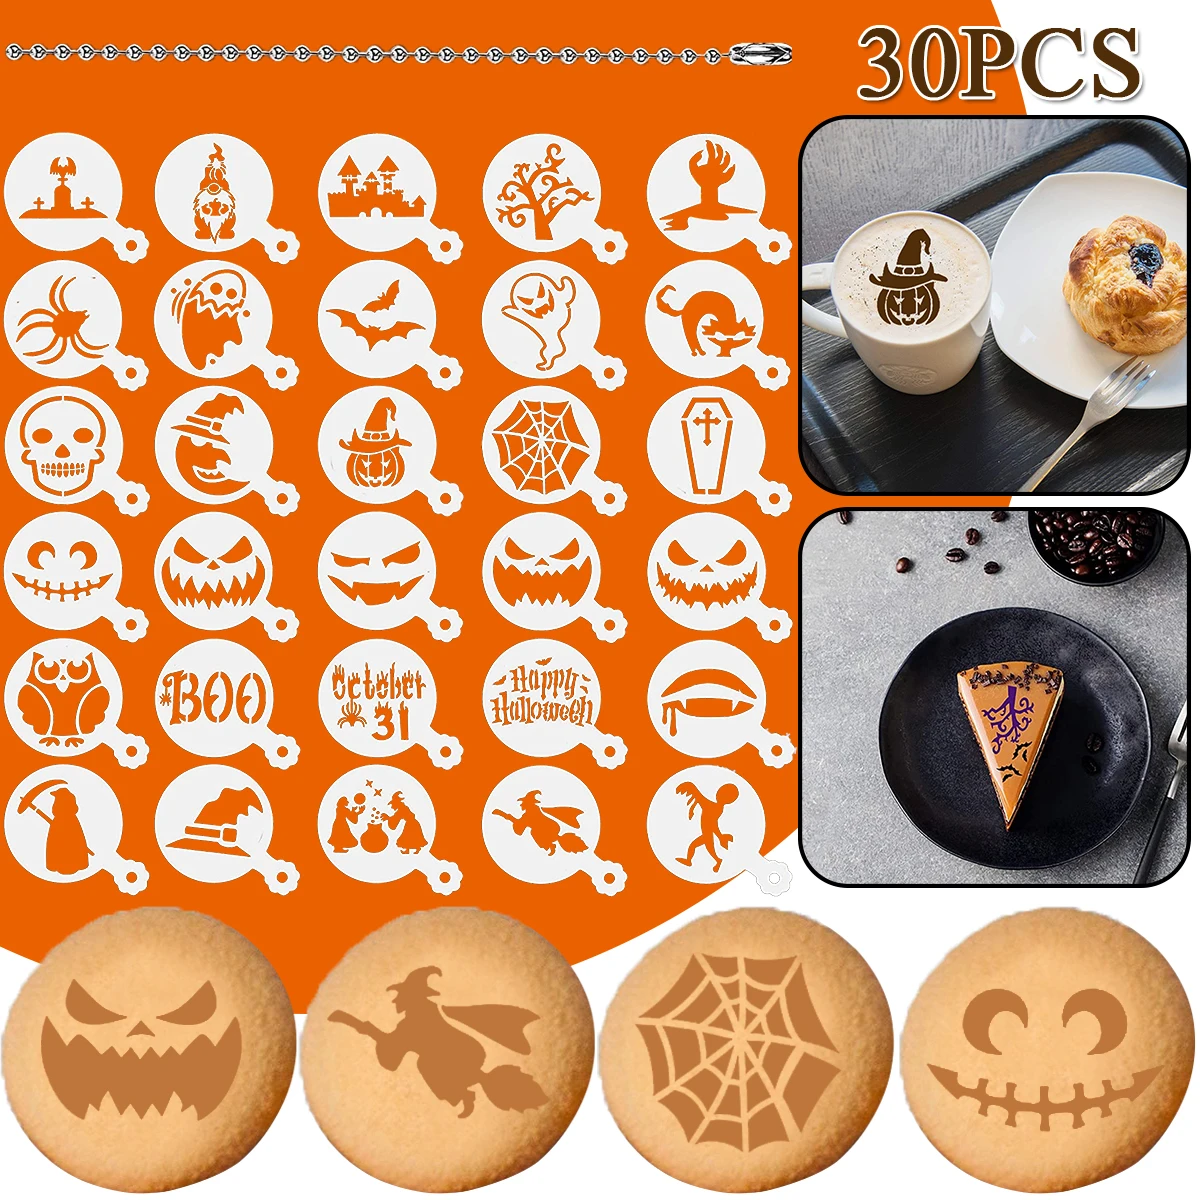 

30Pcs Halloween Cake Stencils Ghost Pumpkin Cake Mold Fondant Coffee Cookies Stencil Template for Biscuits Decoring Tool